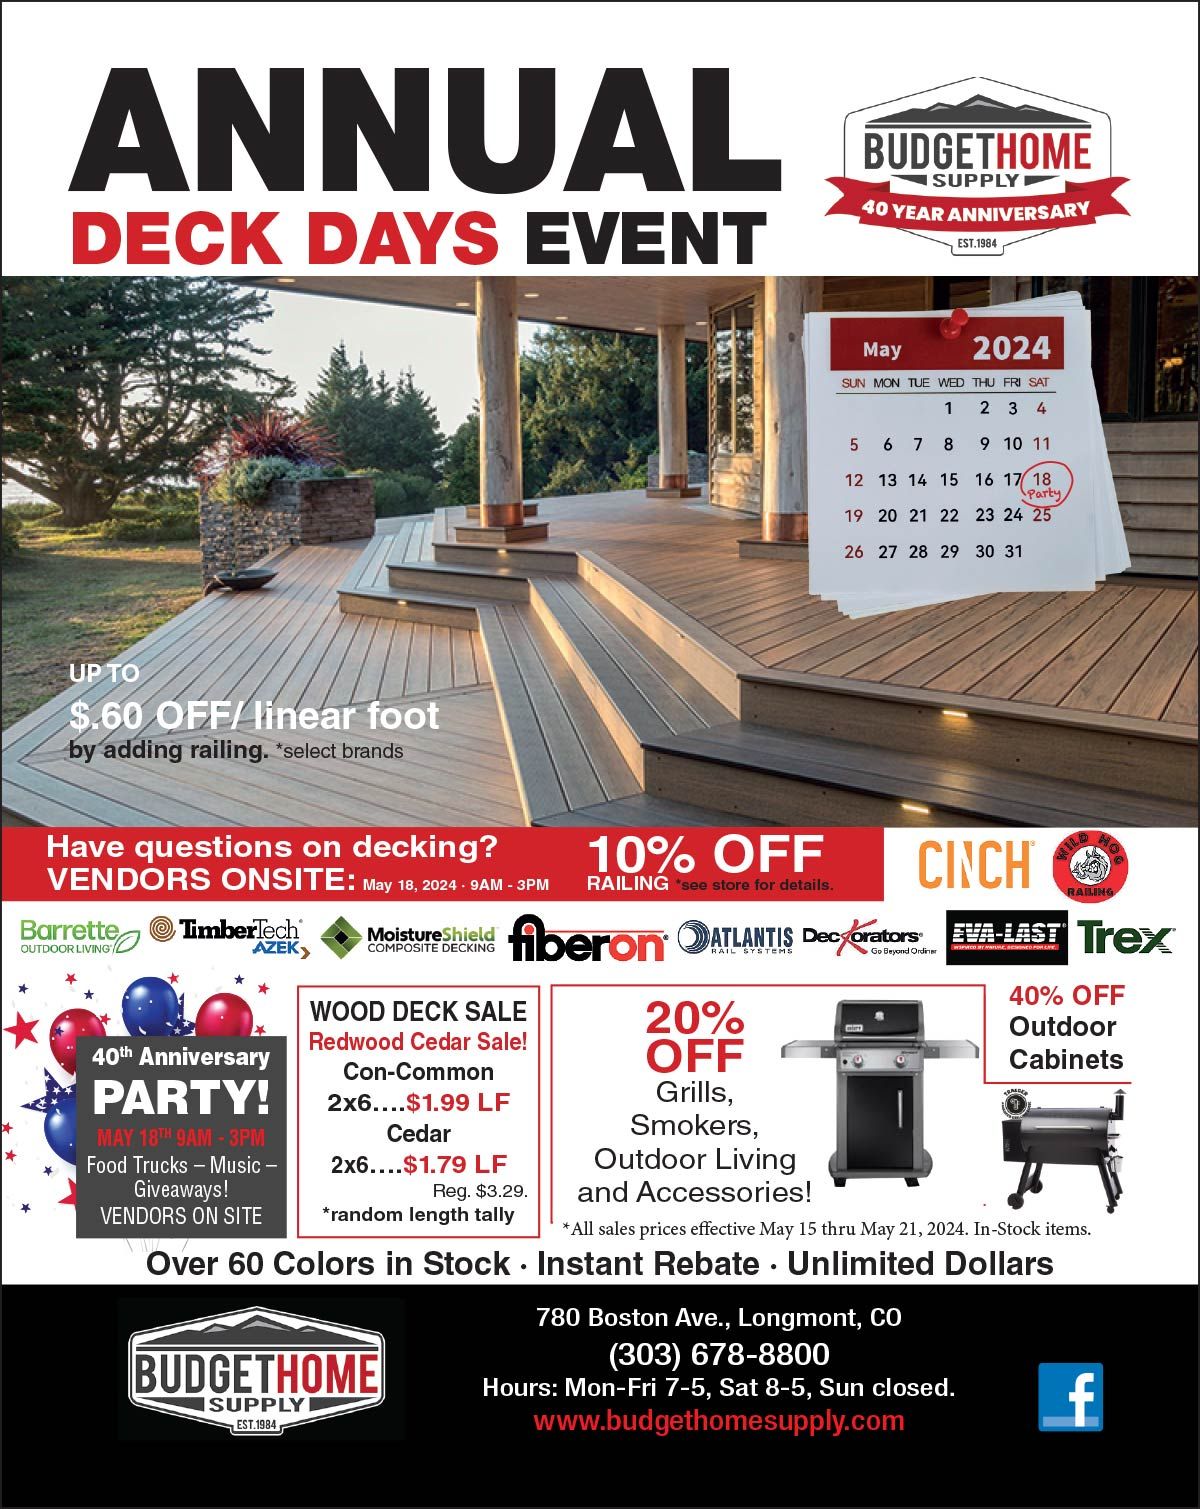 Annual Deck Days Event is Here!